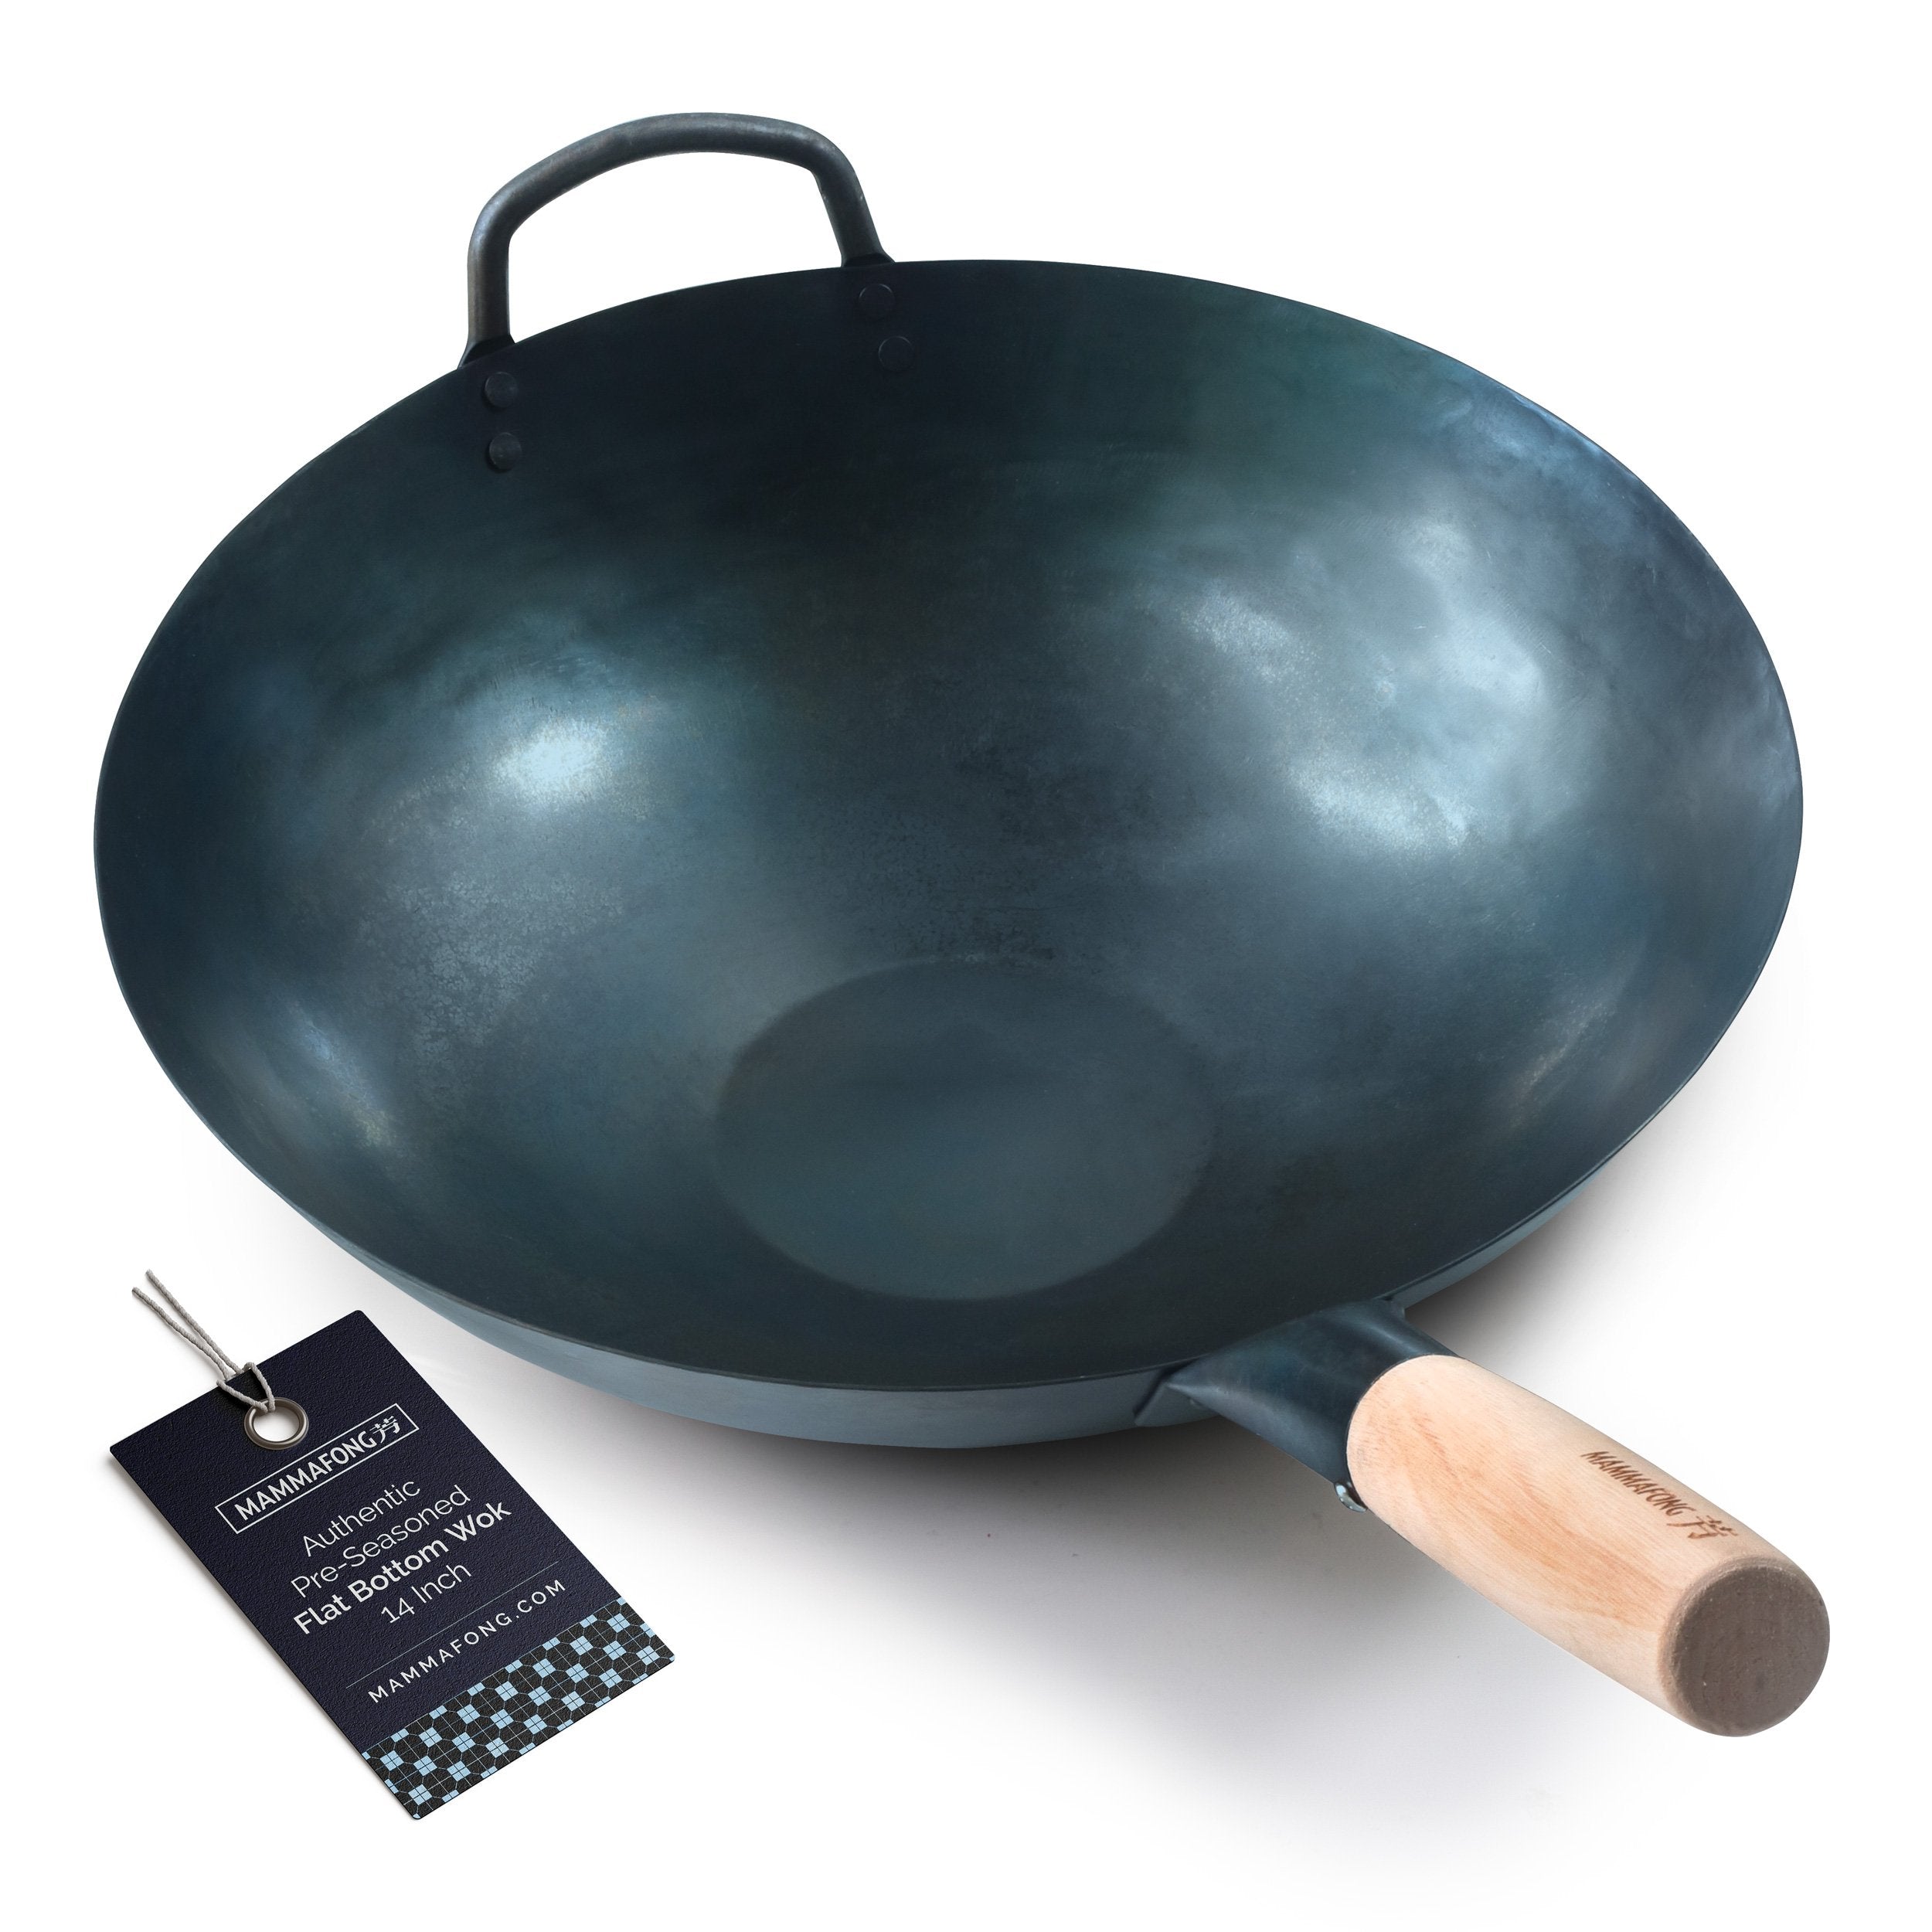 Mammafong Round Bottom Carbon Steel Wok Pan - Authentic Hand Hammered Woks and Stir Fry Pans - 12-Inch Pow Wok for GAS Stoves